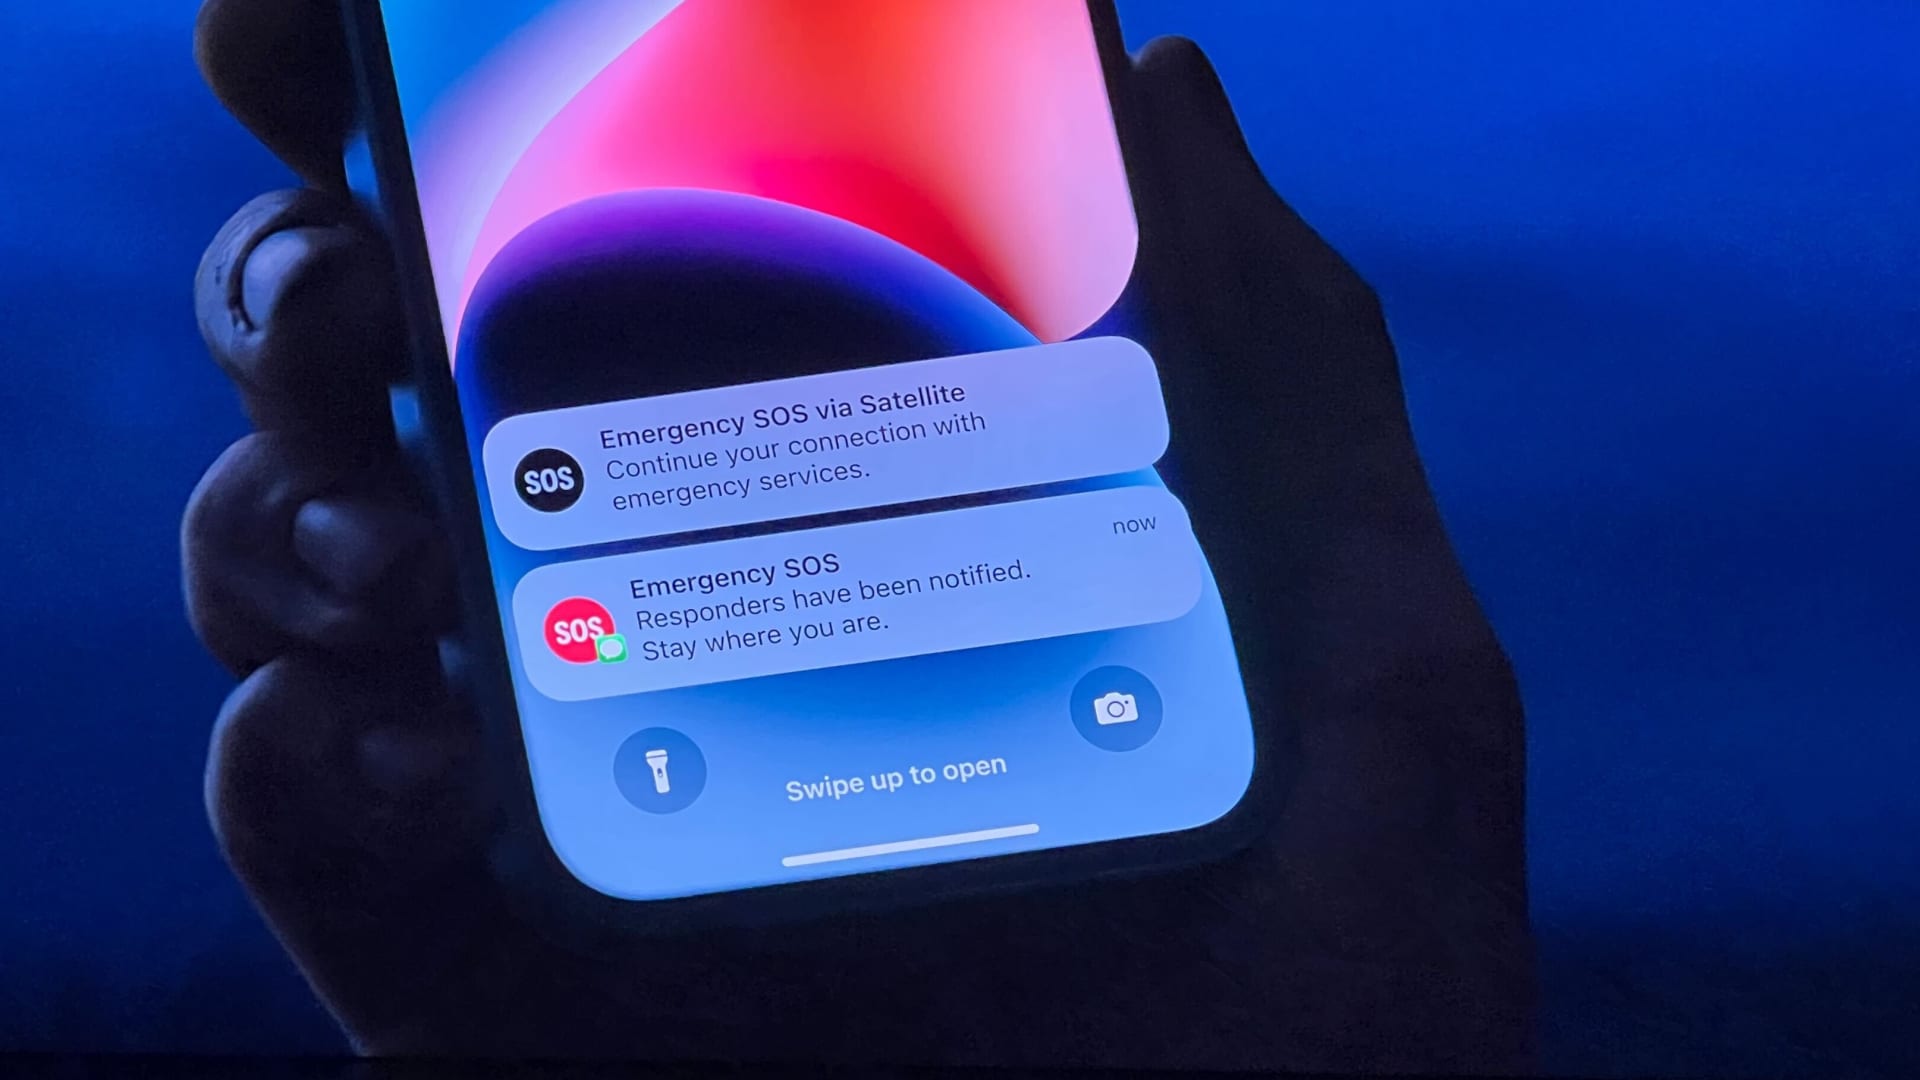 Apple event had an unusually dark tone, emphasizing emergency features